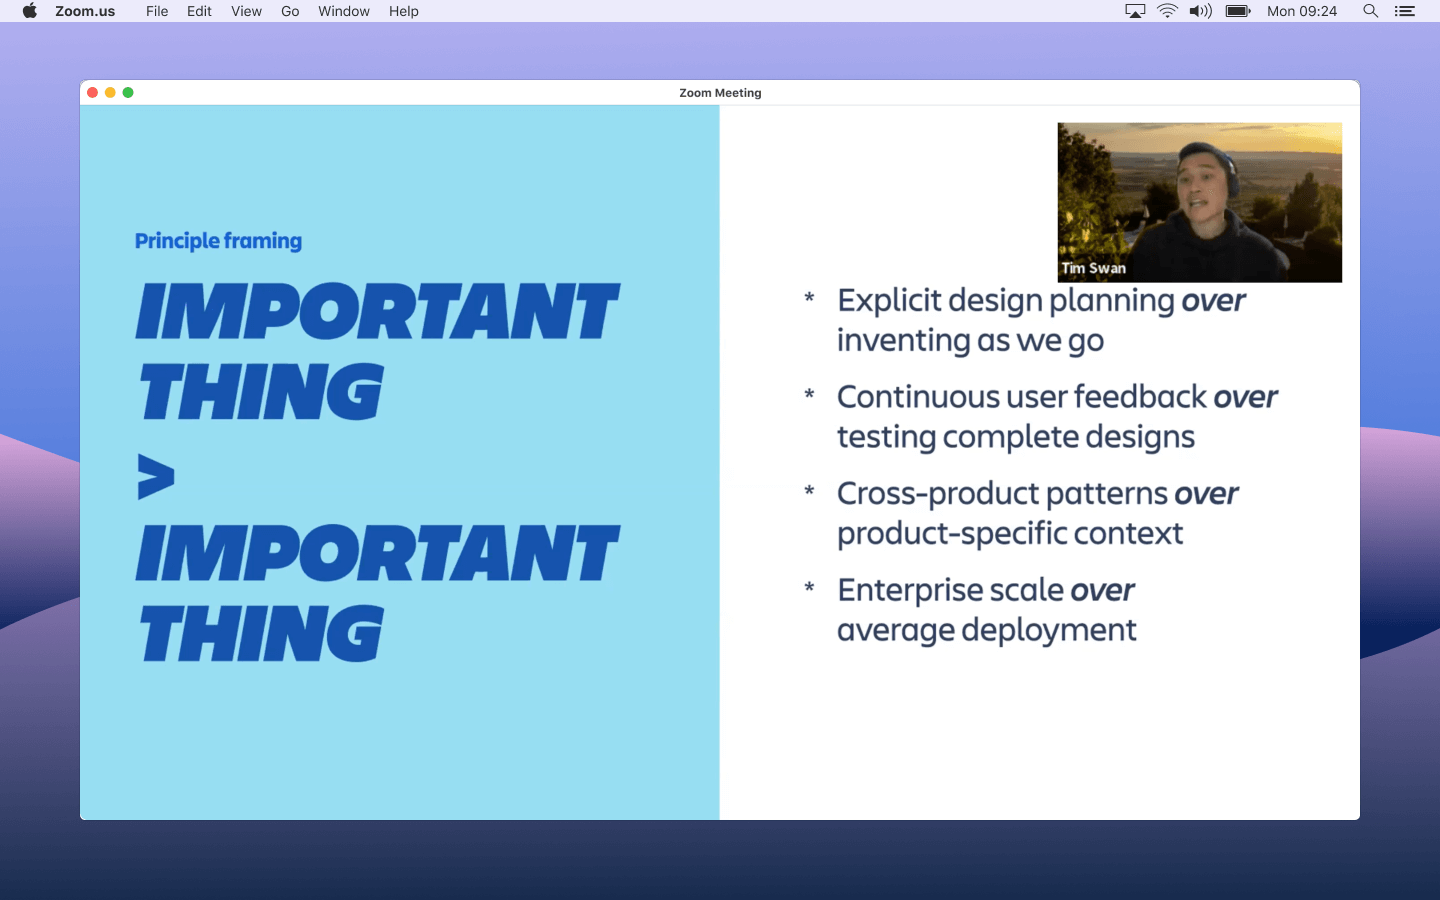 A screenshot of the Zoom presentation where I presented the framing of our principles